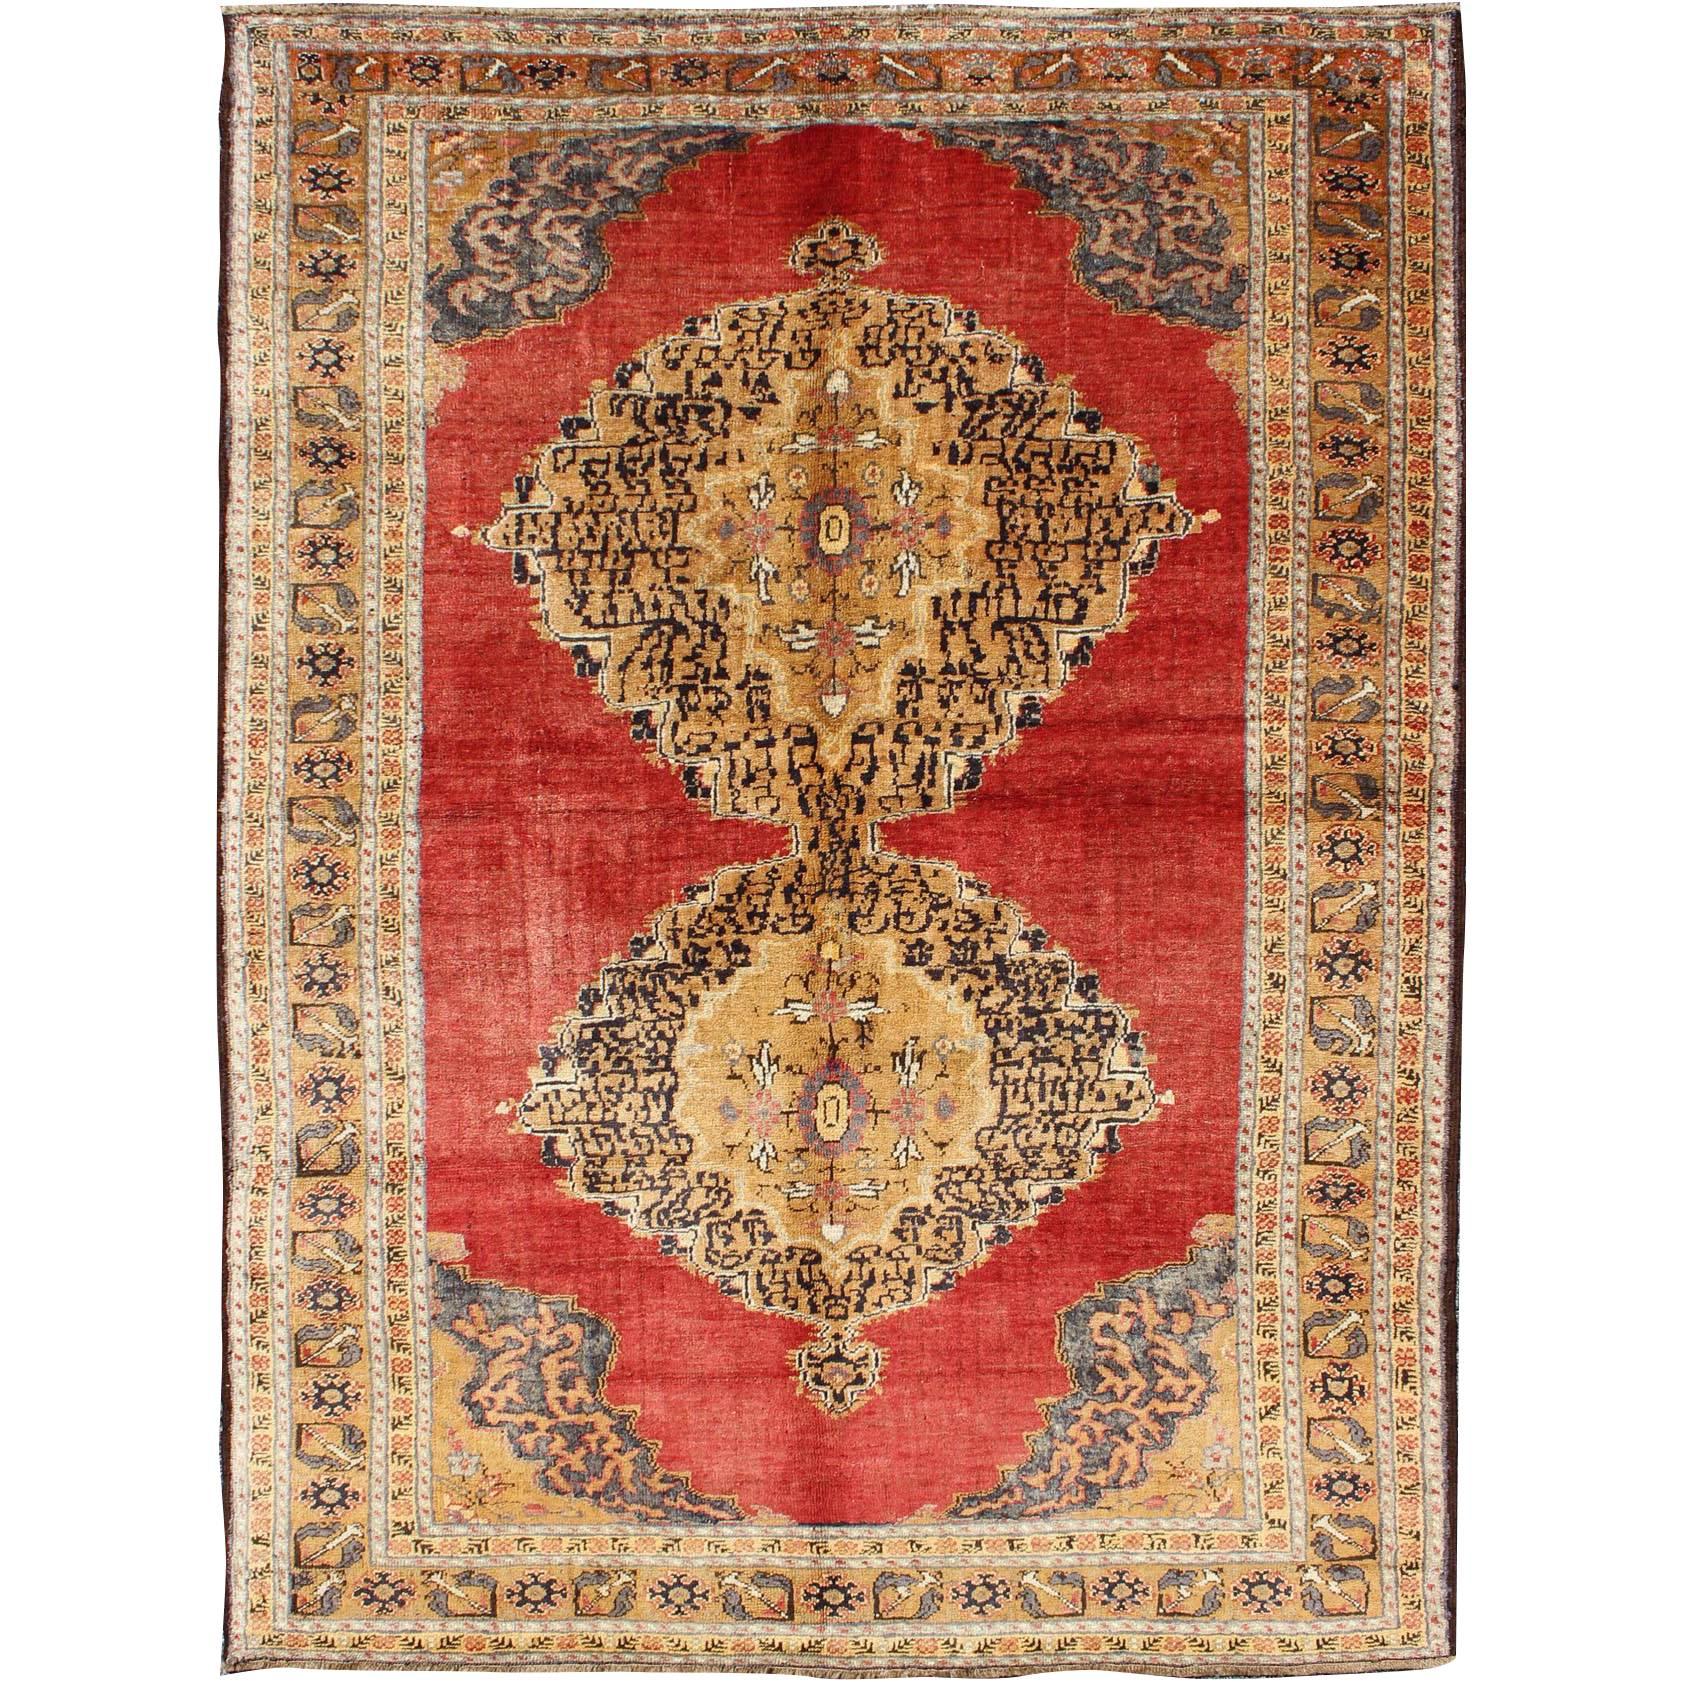 Antique Ottoman Design Turkish Rug with Double Medallion in Red, Gold, Navy Blue